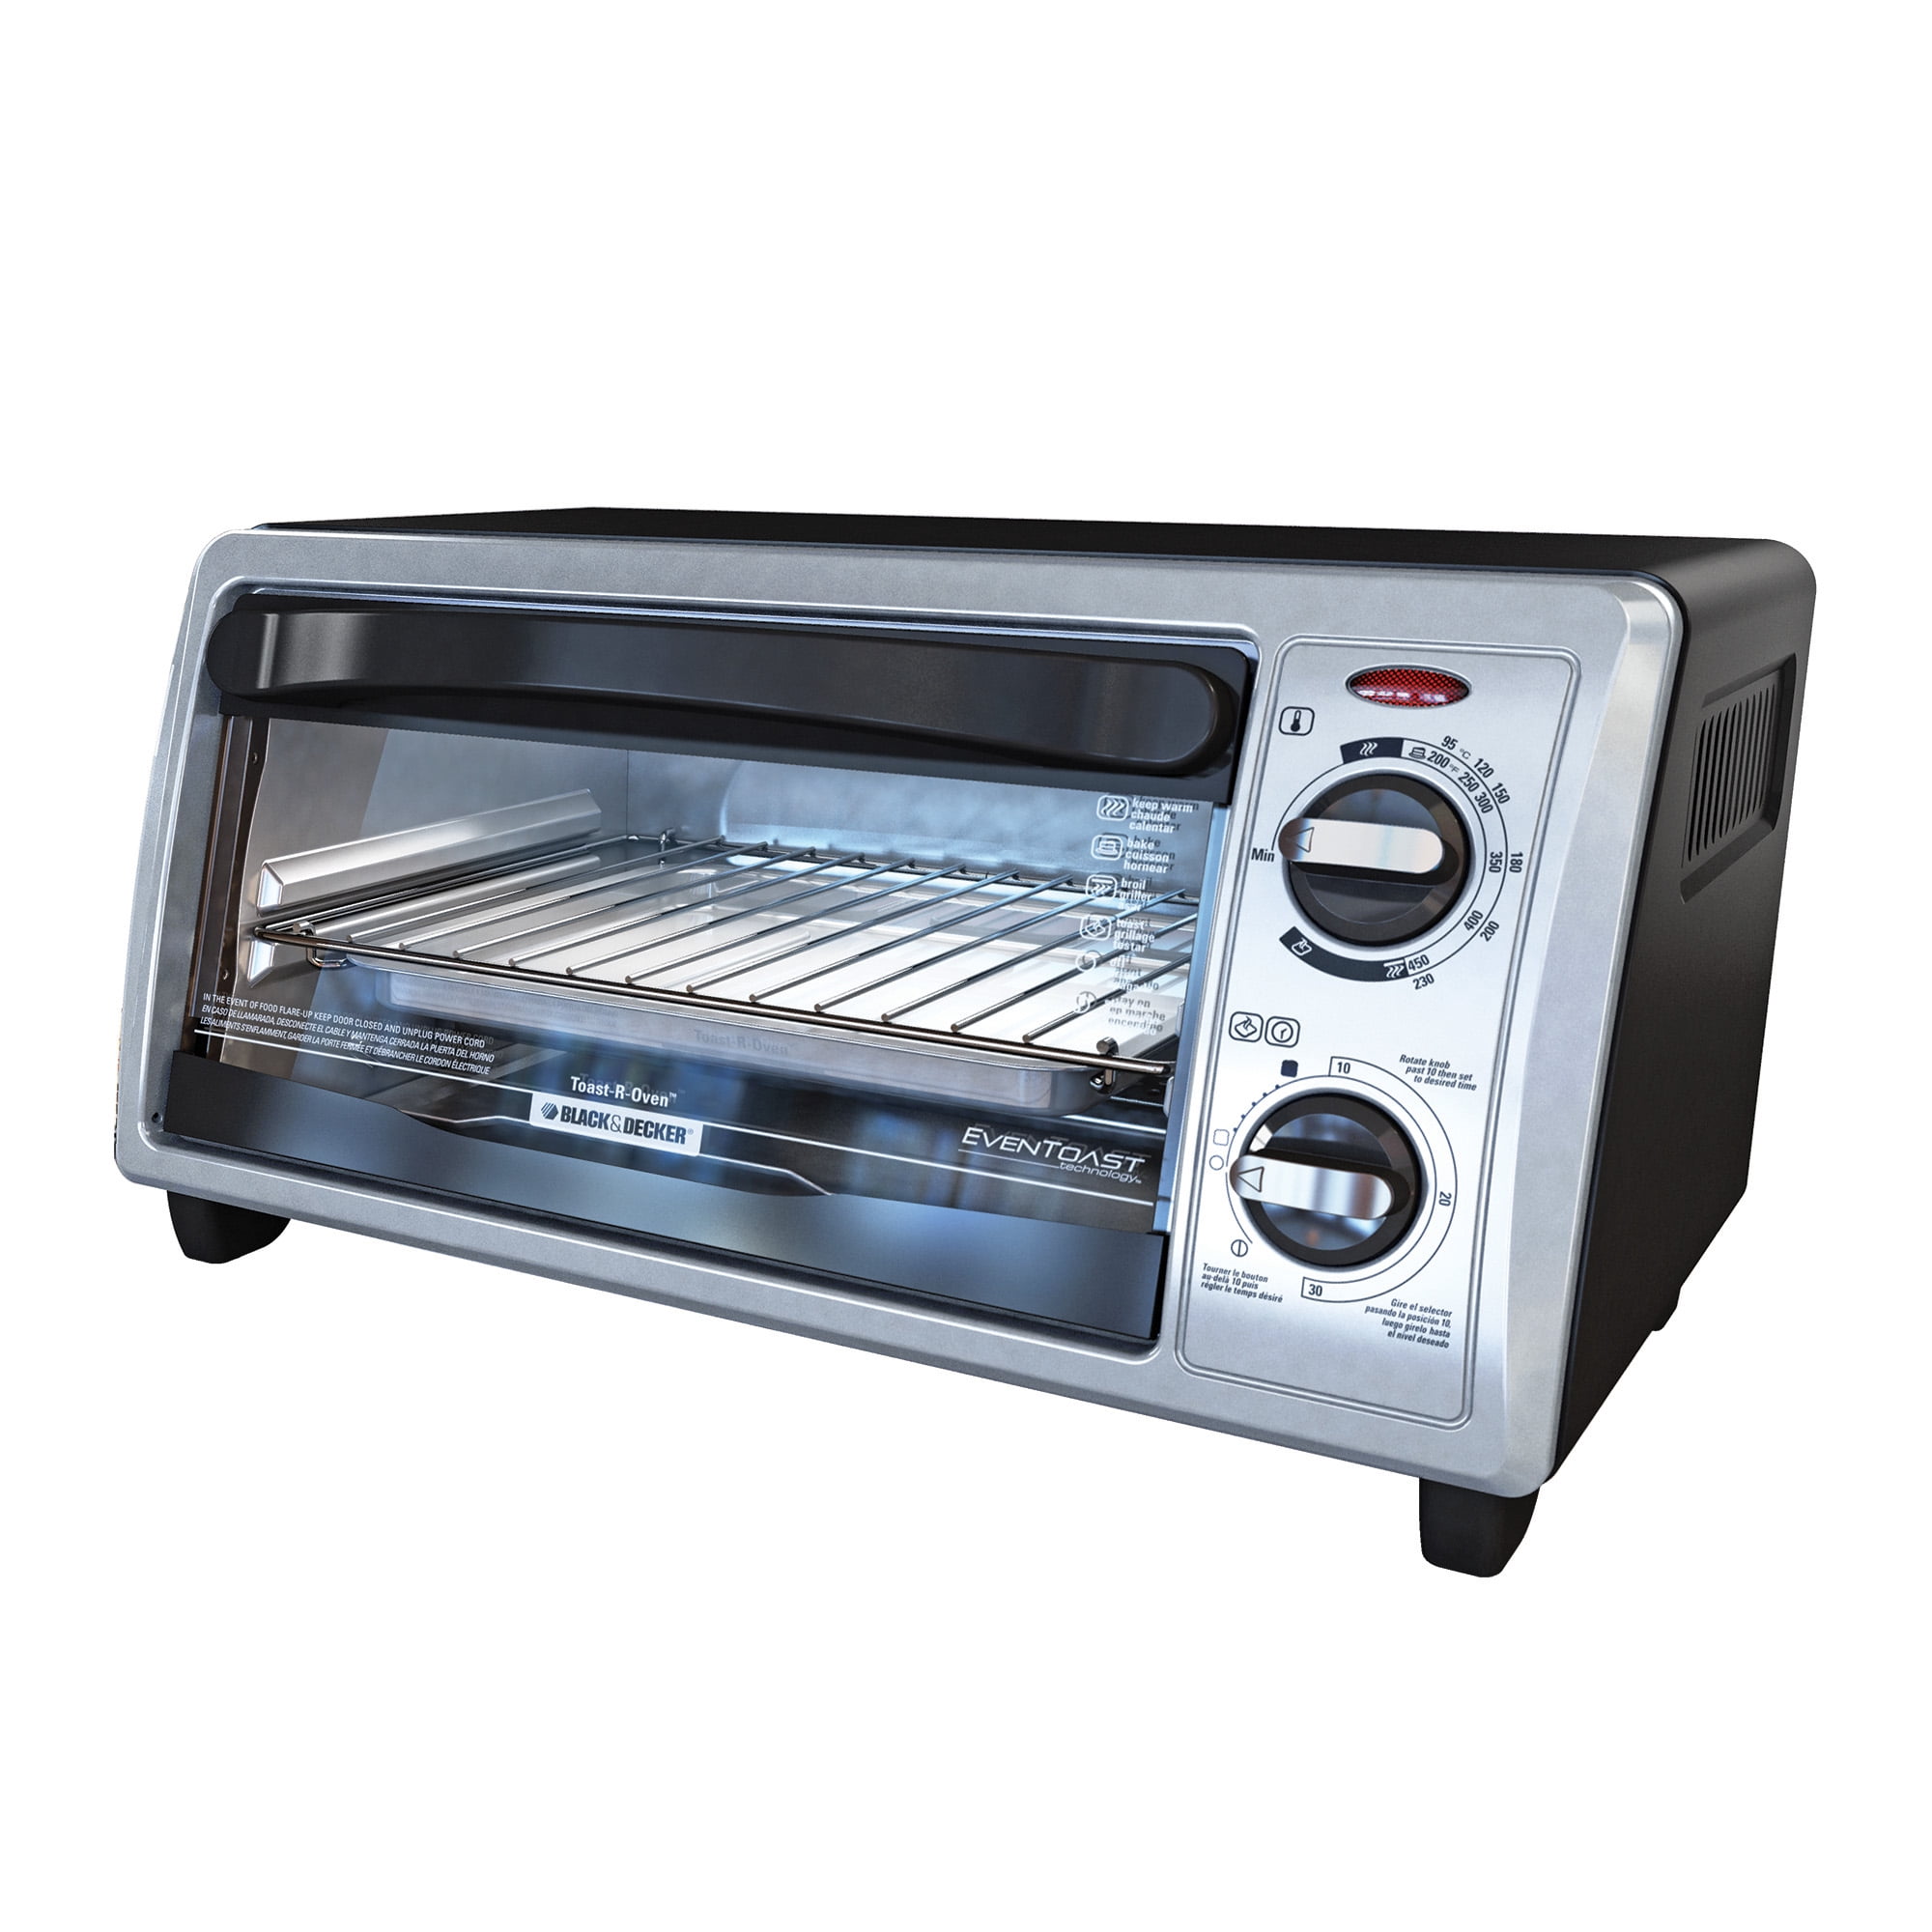 Black+Decker TO1303SB 4-Slice Toaster Oven, 14.5 x 8.8 x 10.8 inches,  Stainless Steel/Black